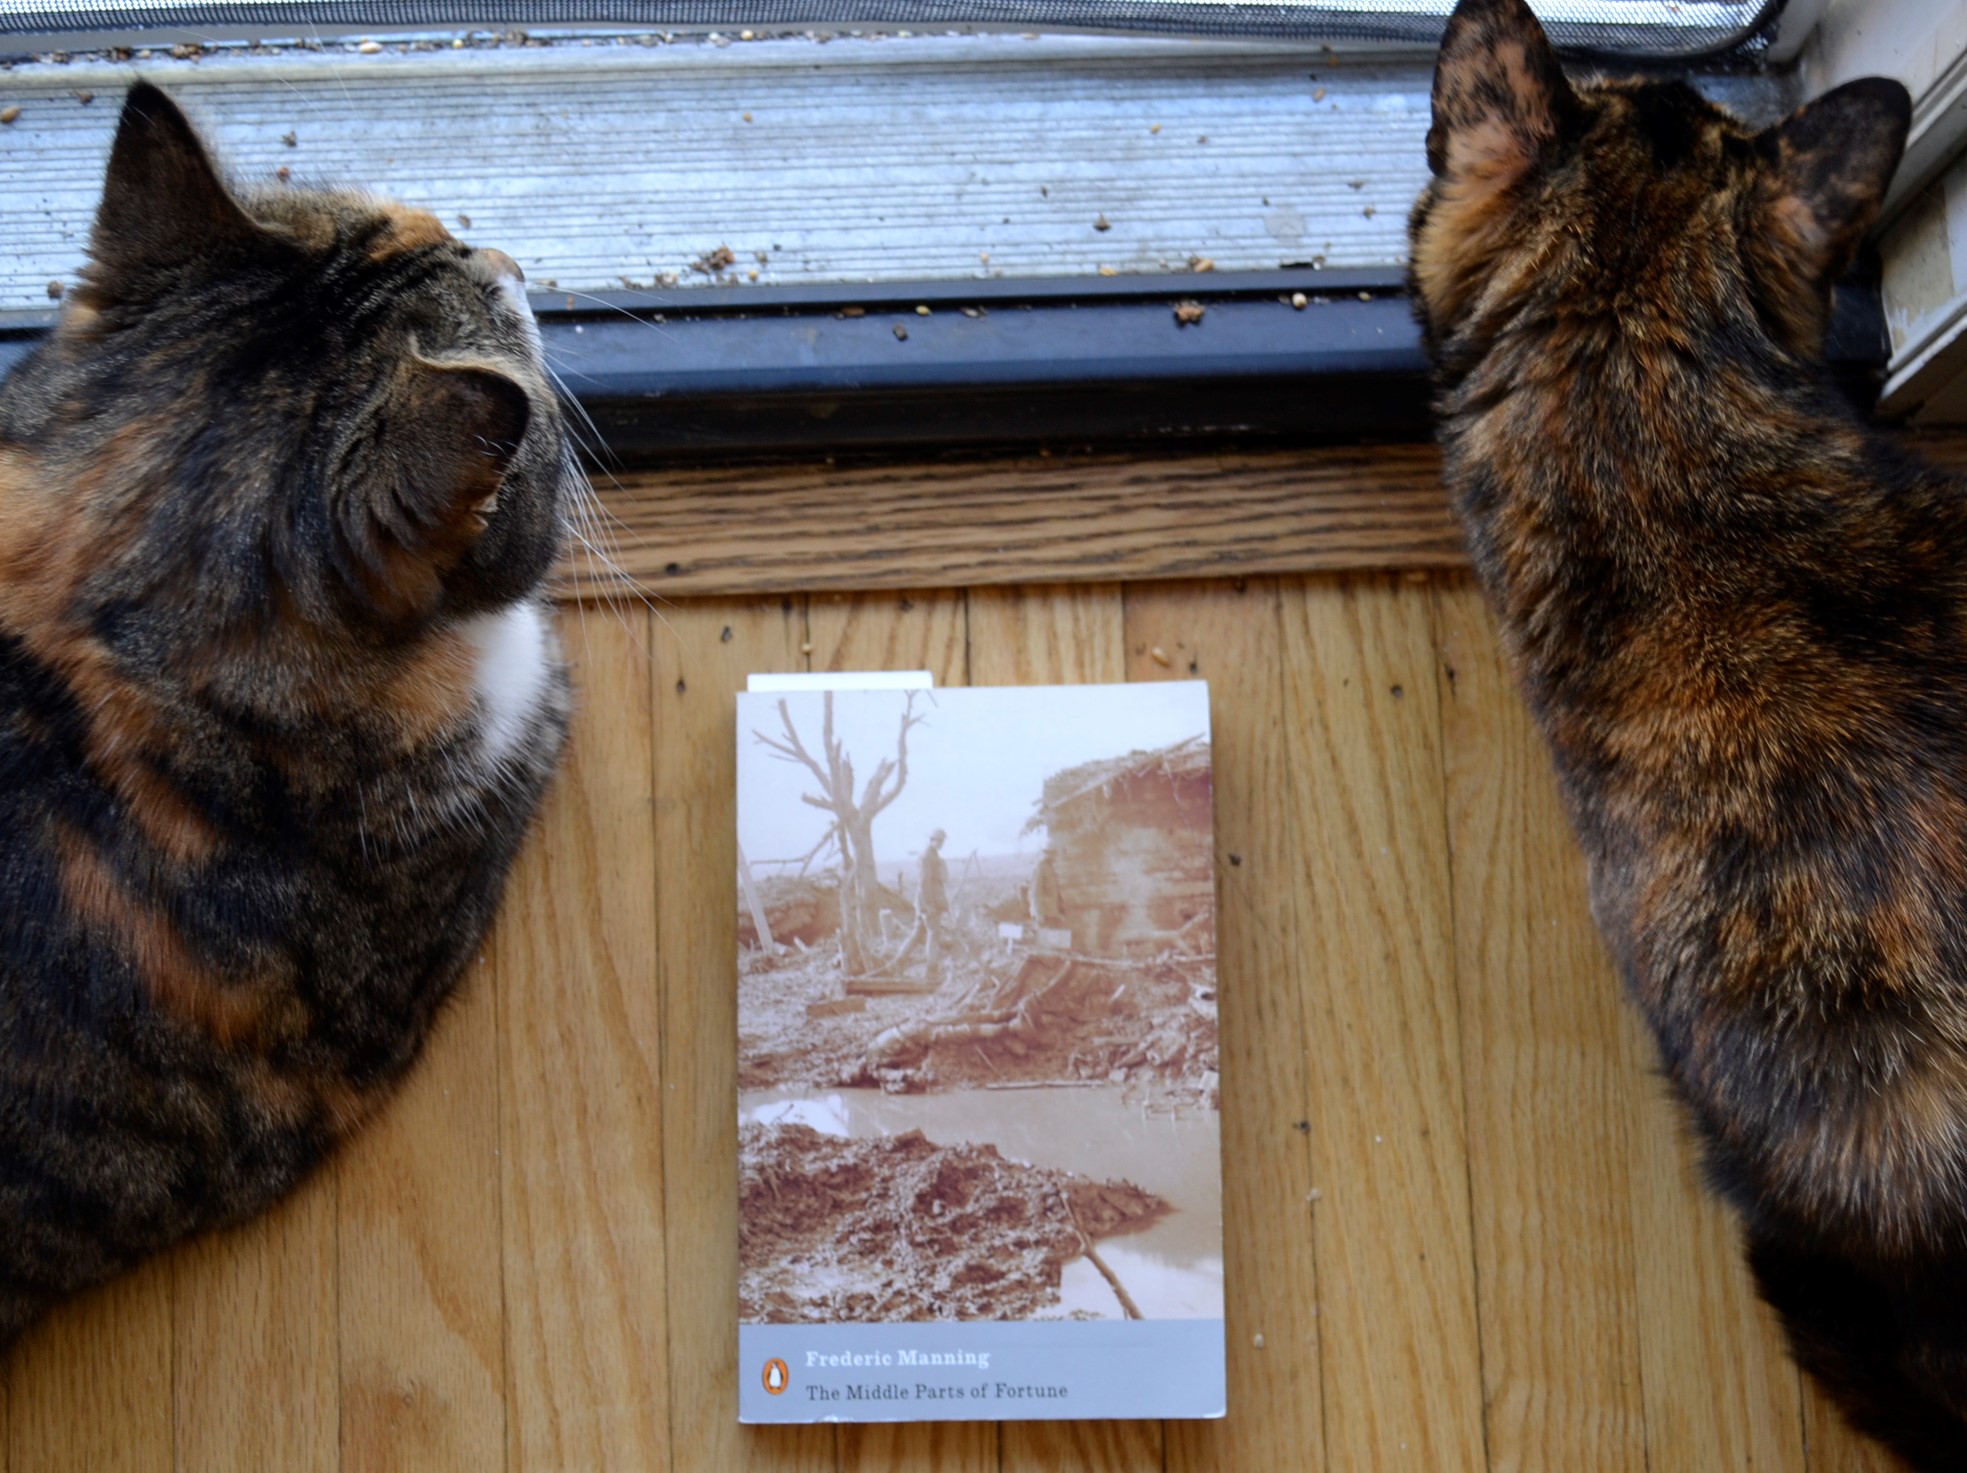 Between two cats, is a book with a cover showing a flooded trench and dead soliders.